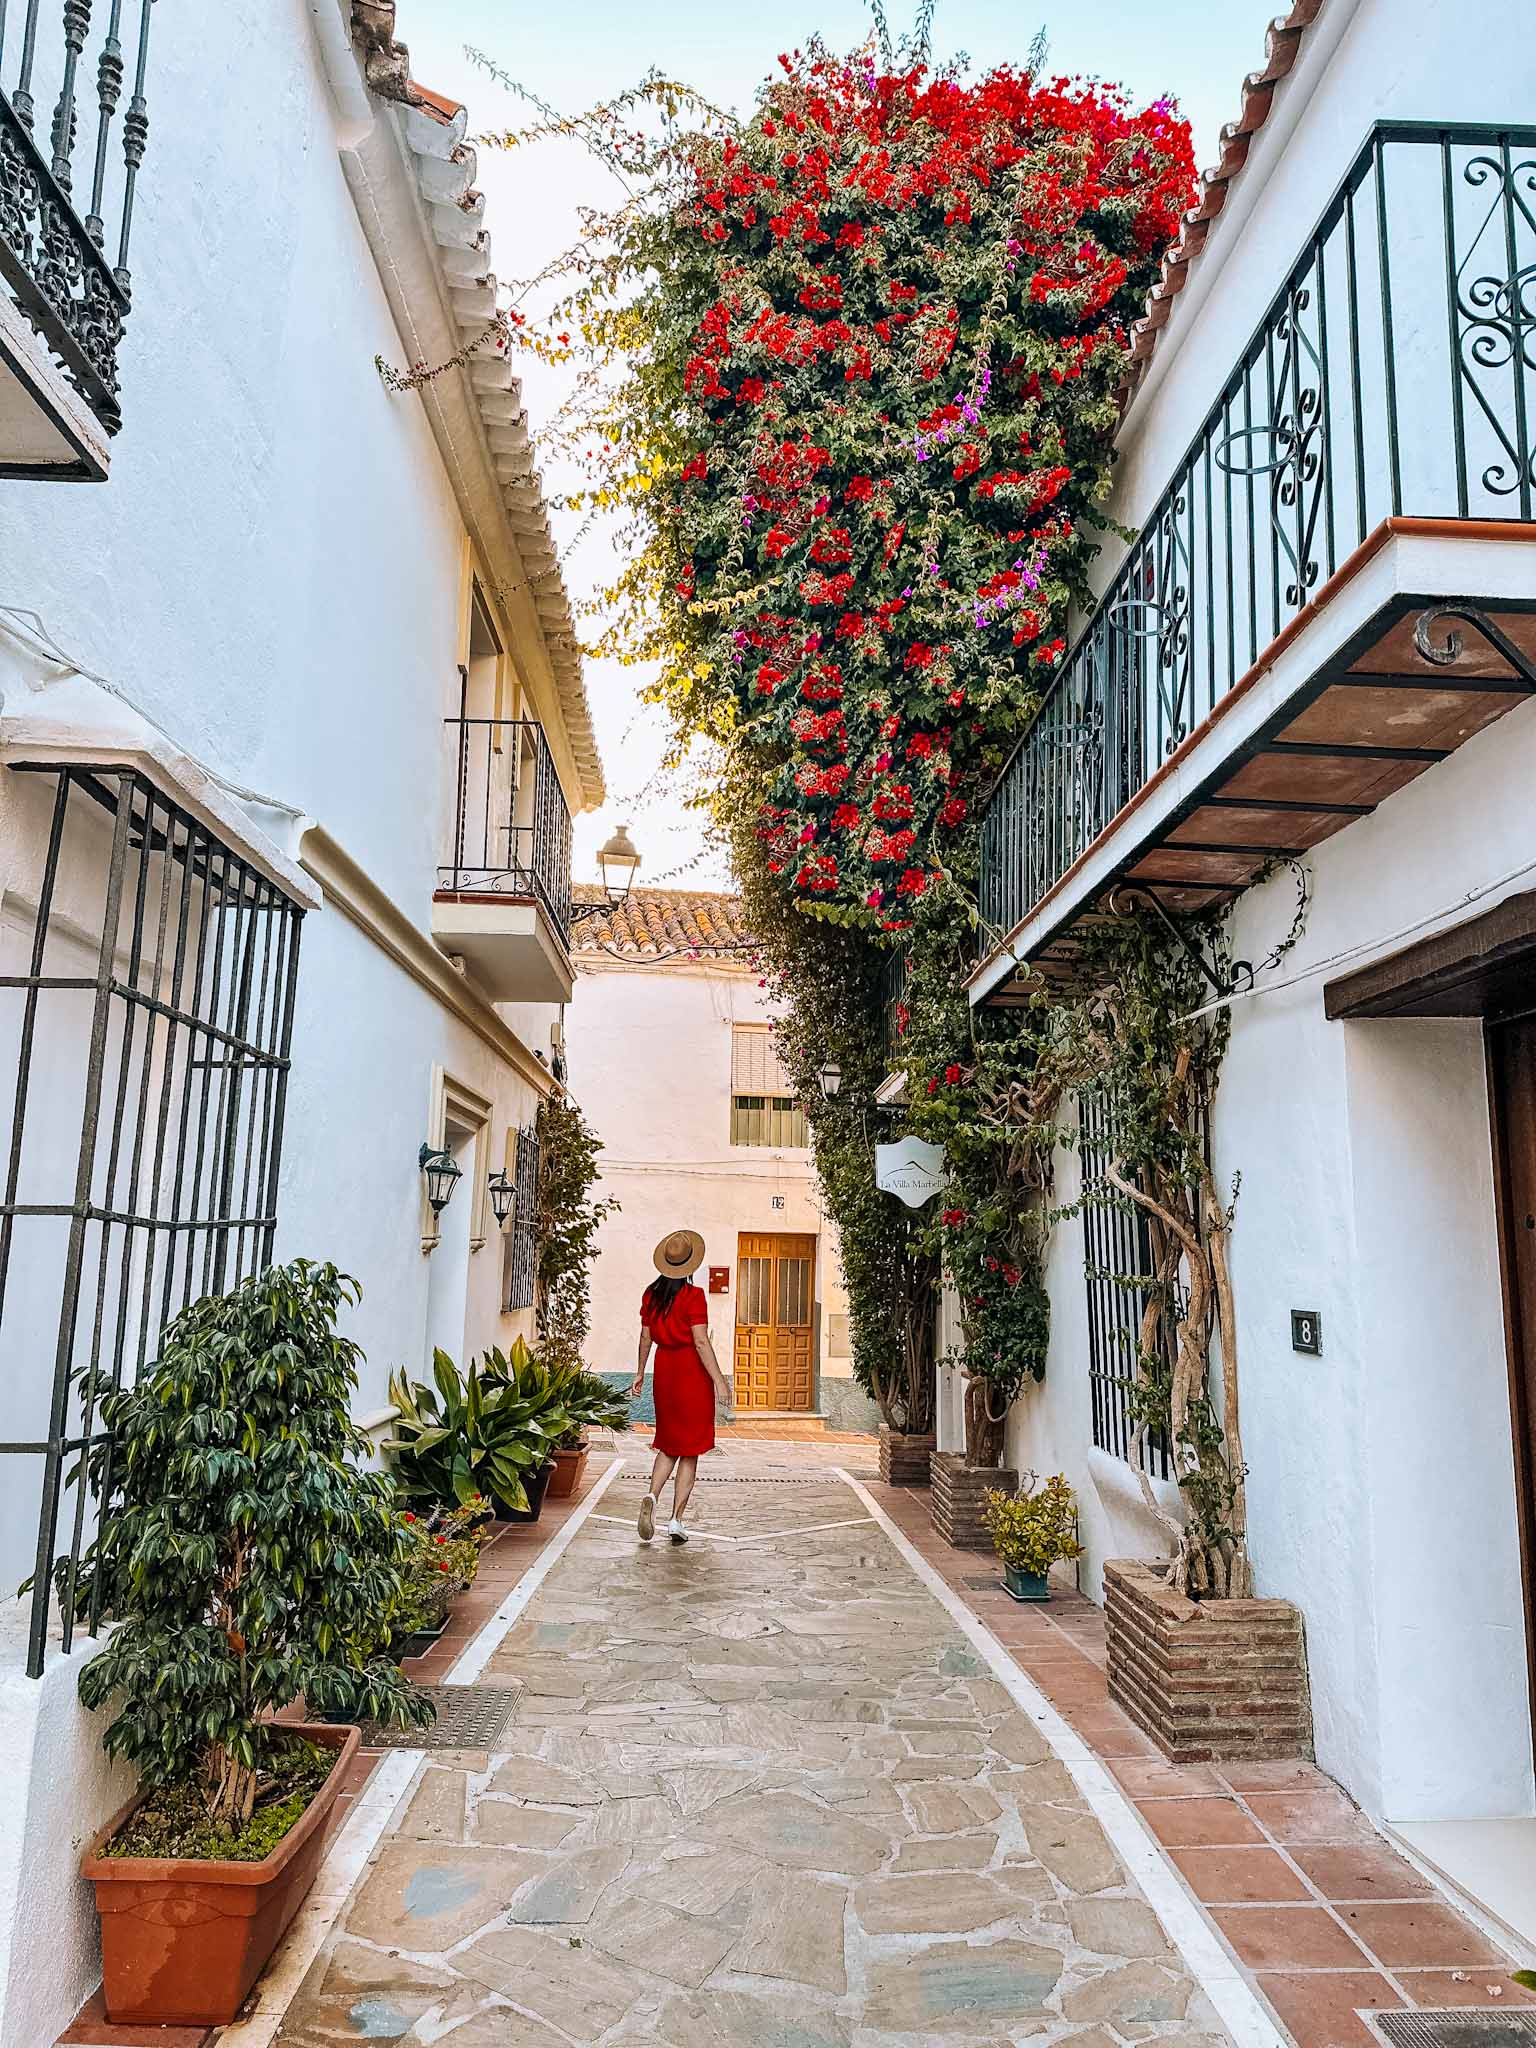 Most beautiful white villages towns in Andalusia, Spain - Marbella